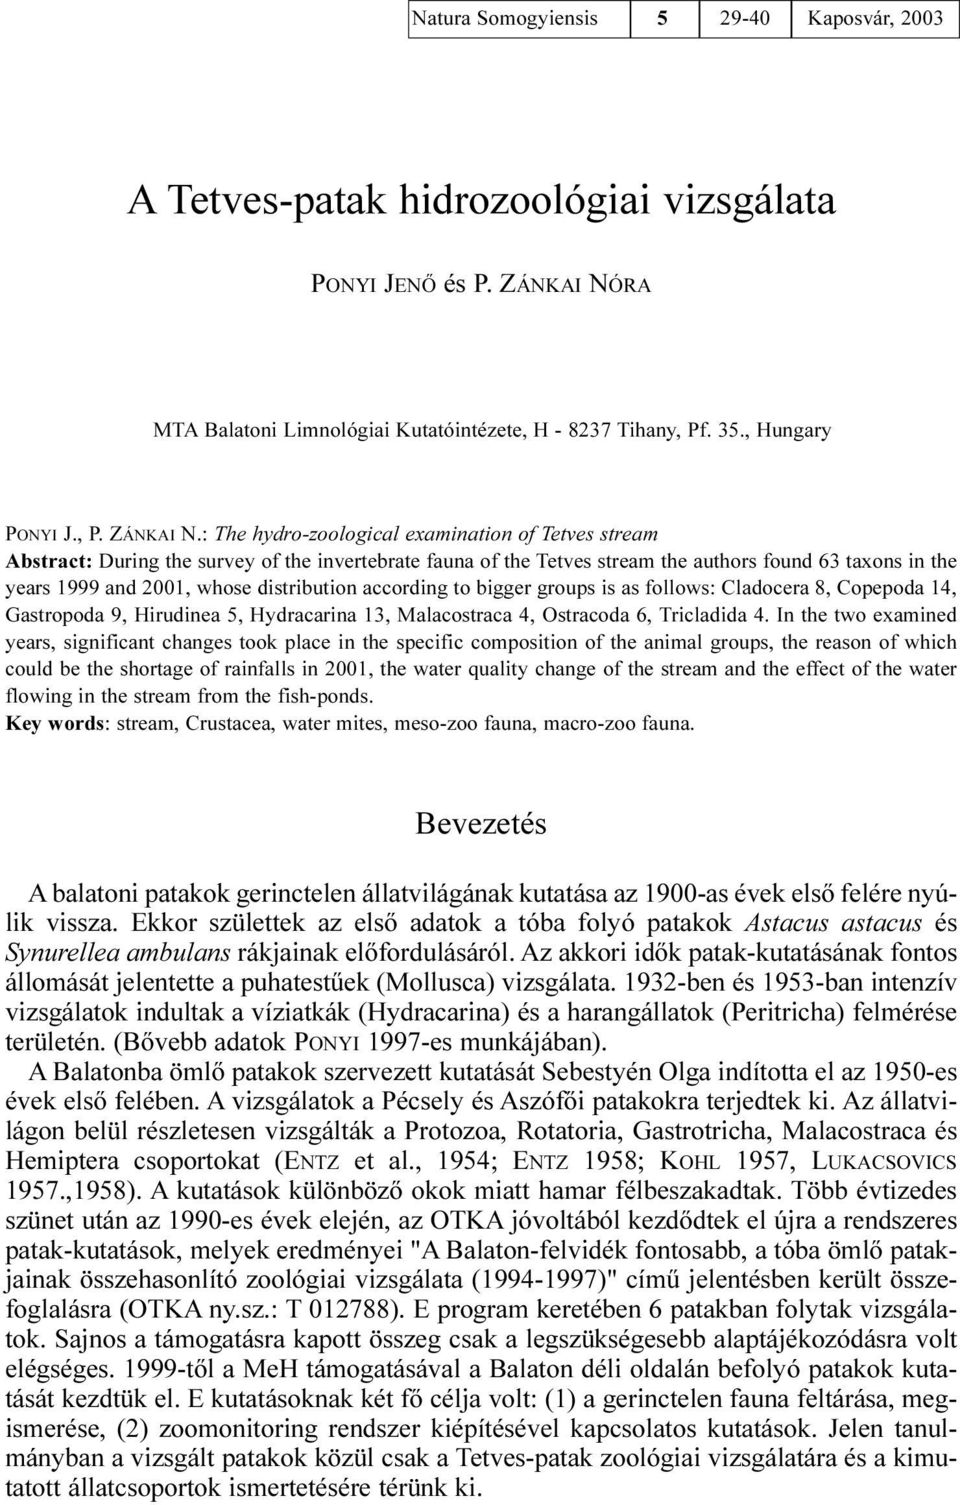 : The hydro-zoological examination of Tetves stream Abstract: During the survey of the invertebrate fauna of the Tetves stream the authors found 63 taxons in the years 1999 and 2001, whose